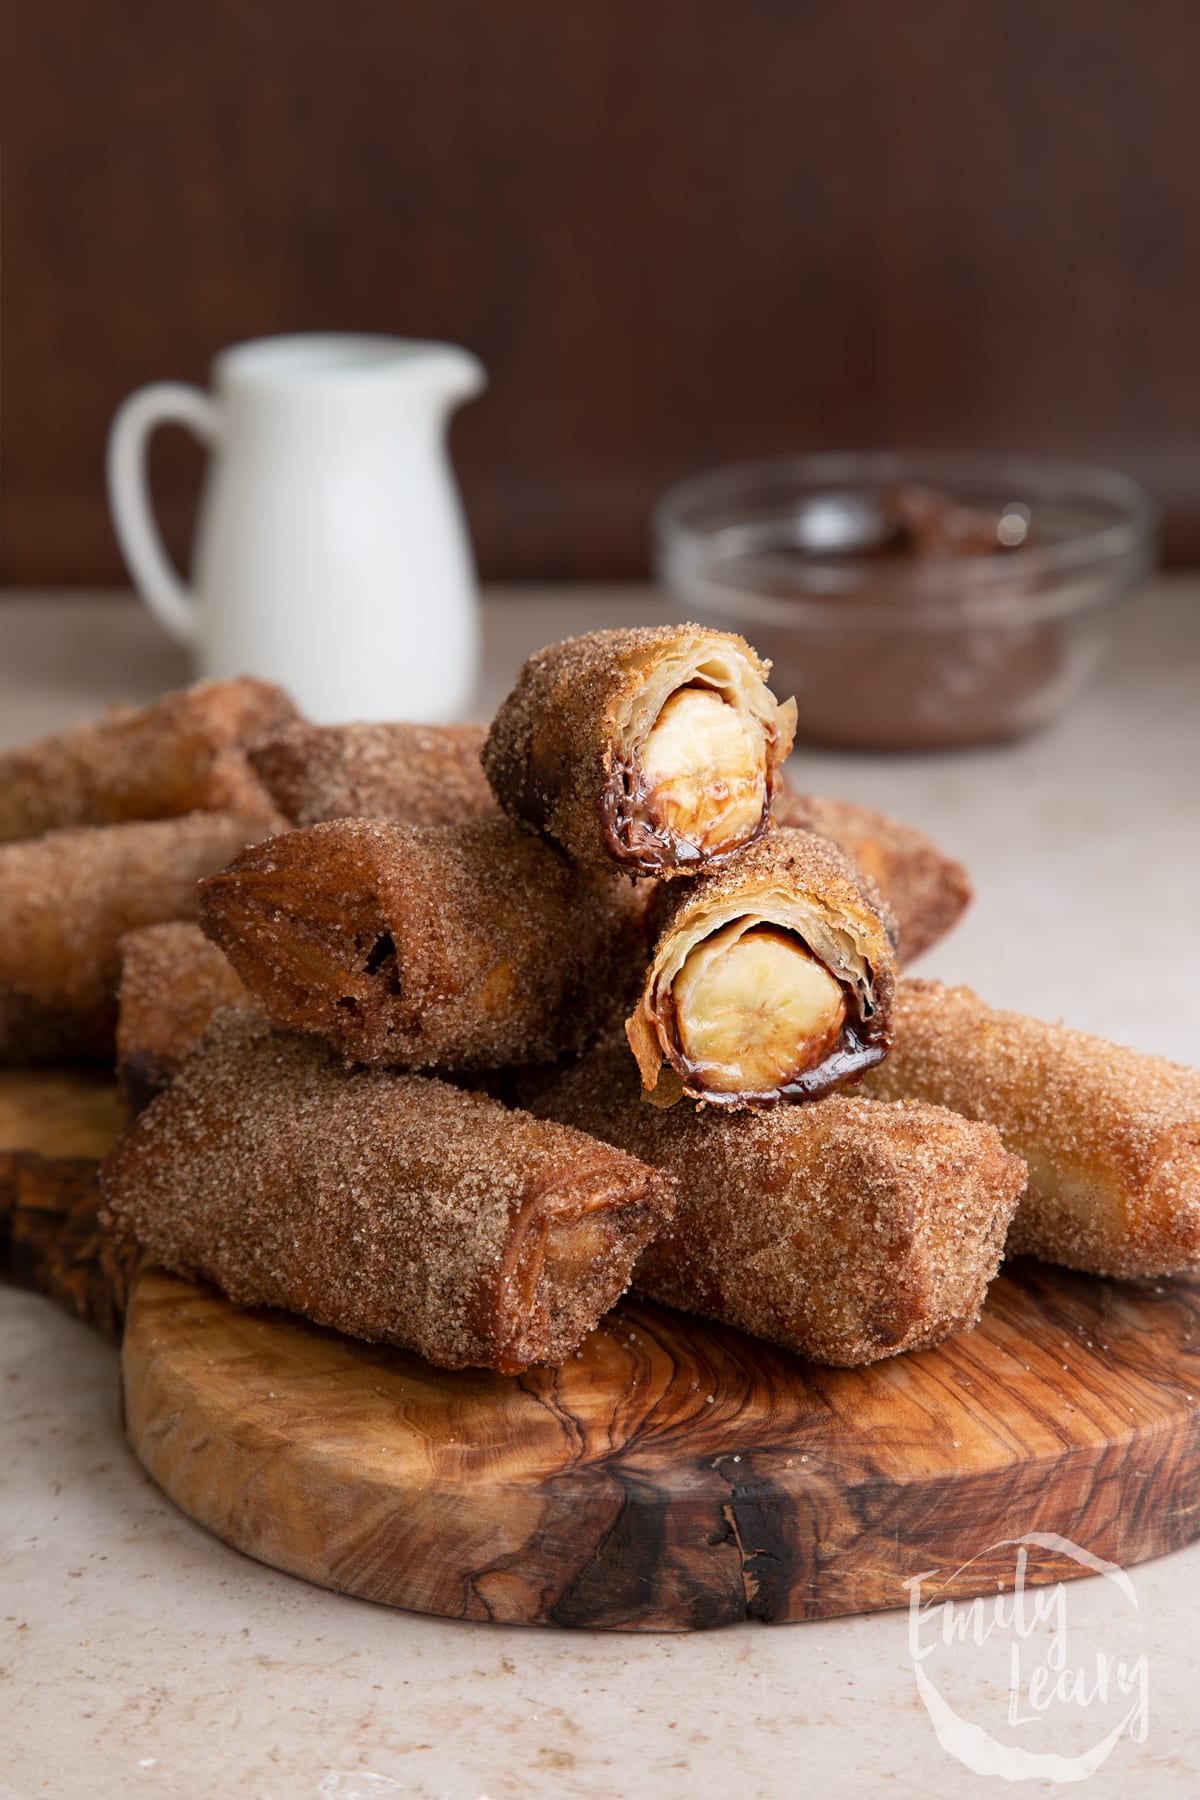 A stack of banana chocolate spring rolls with one sliced open at the top.